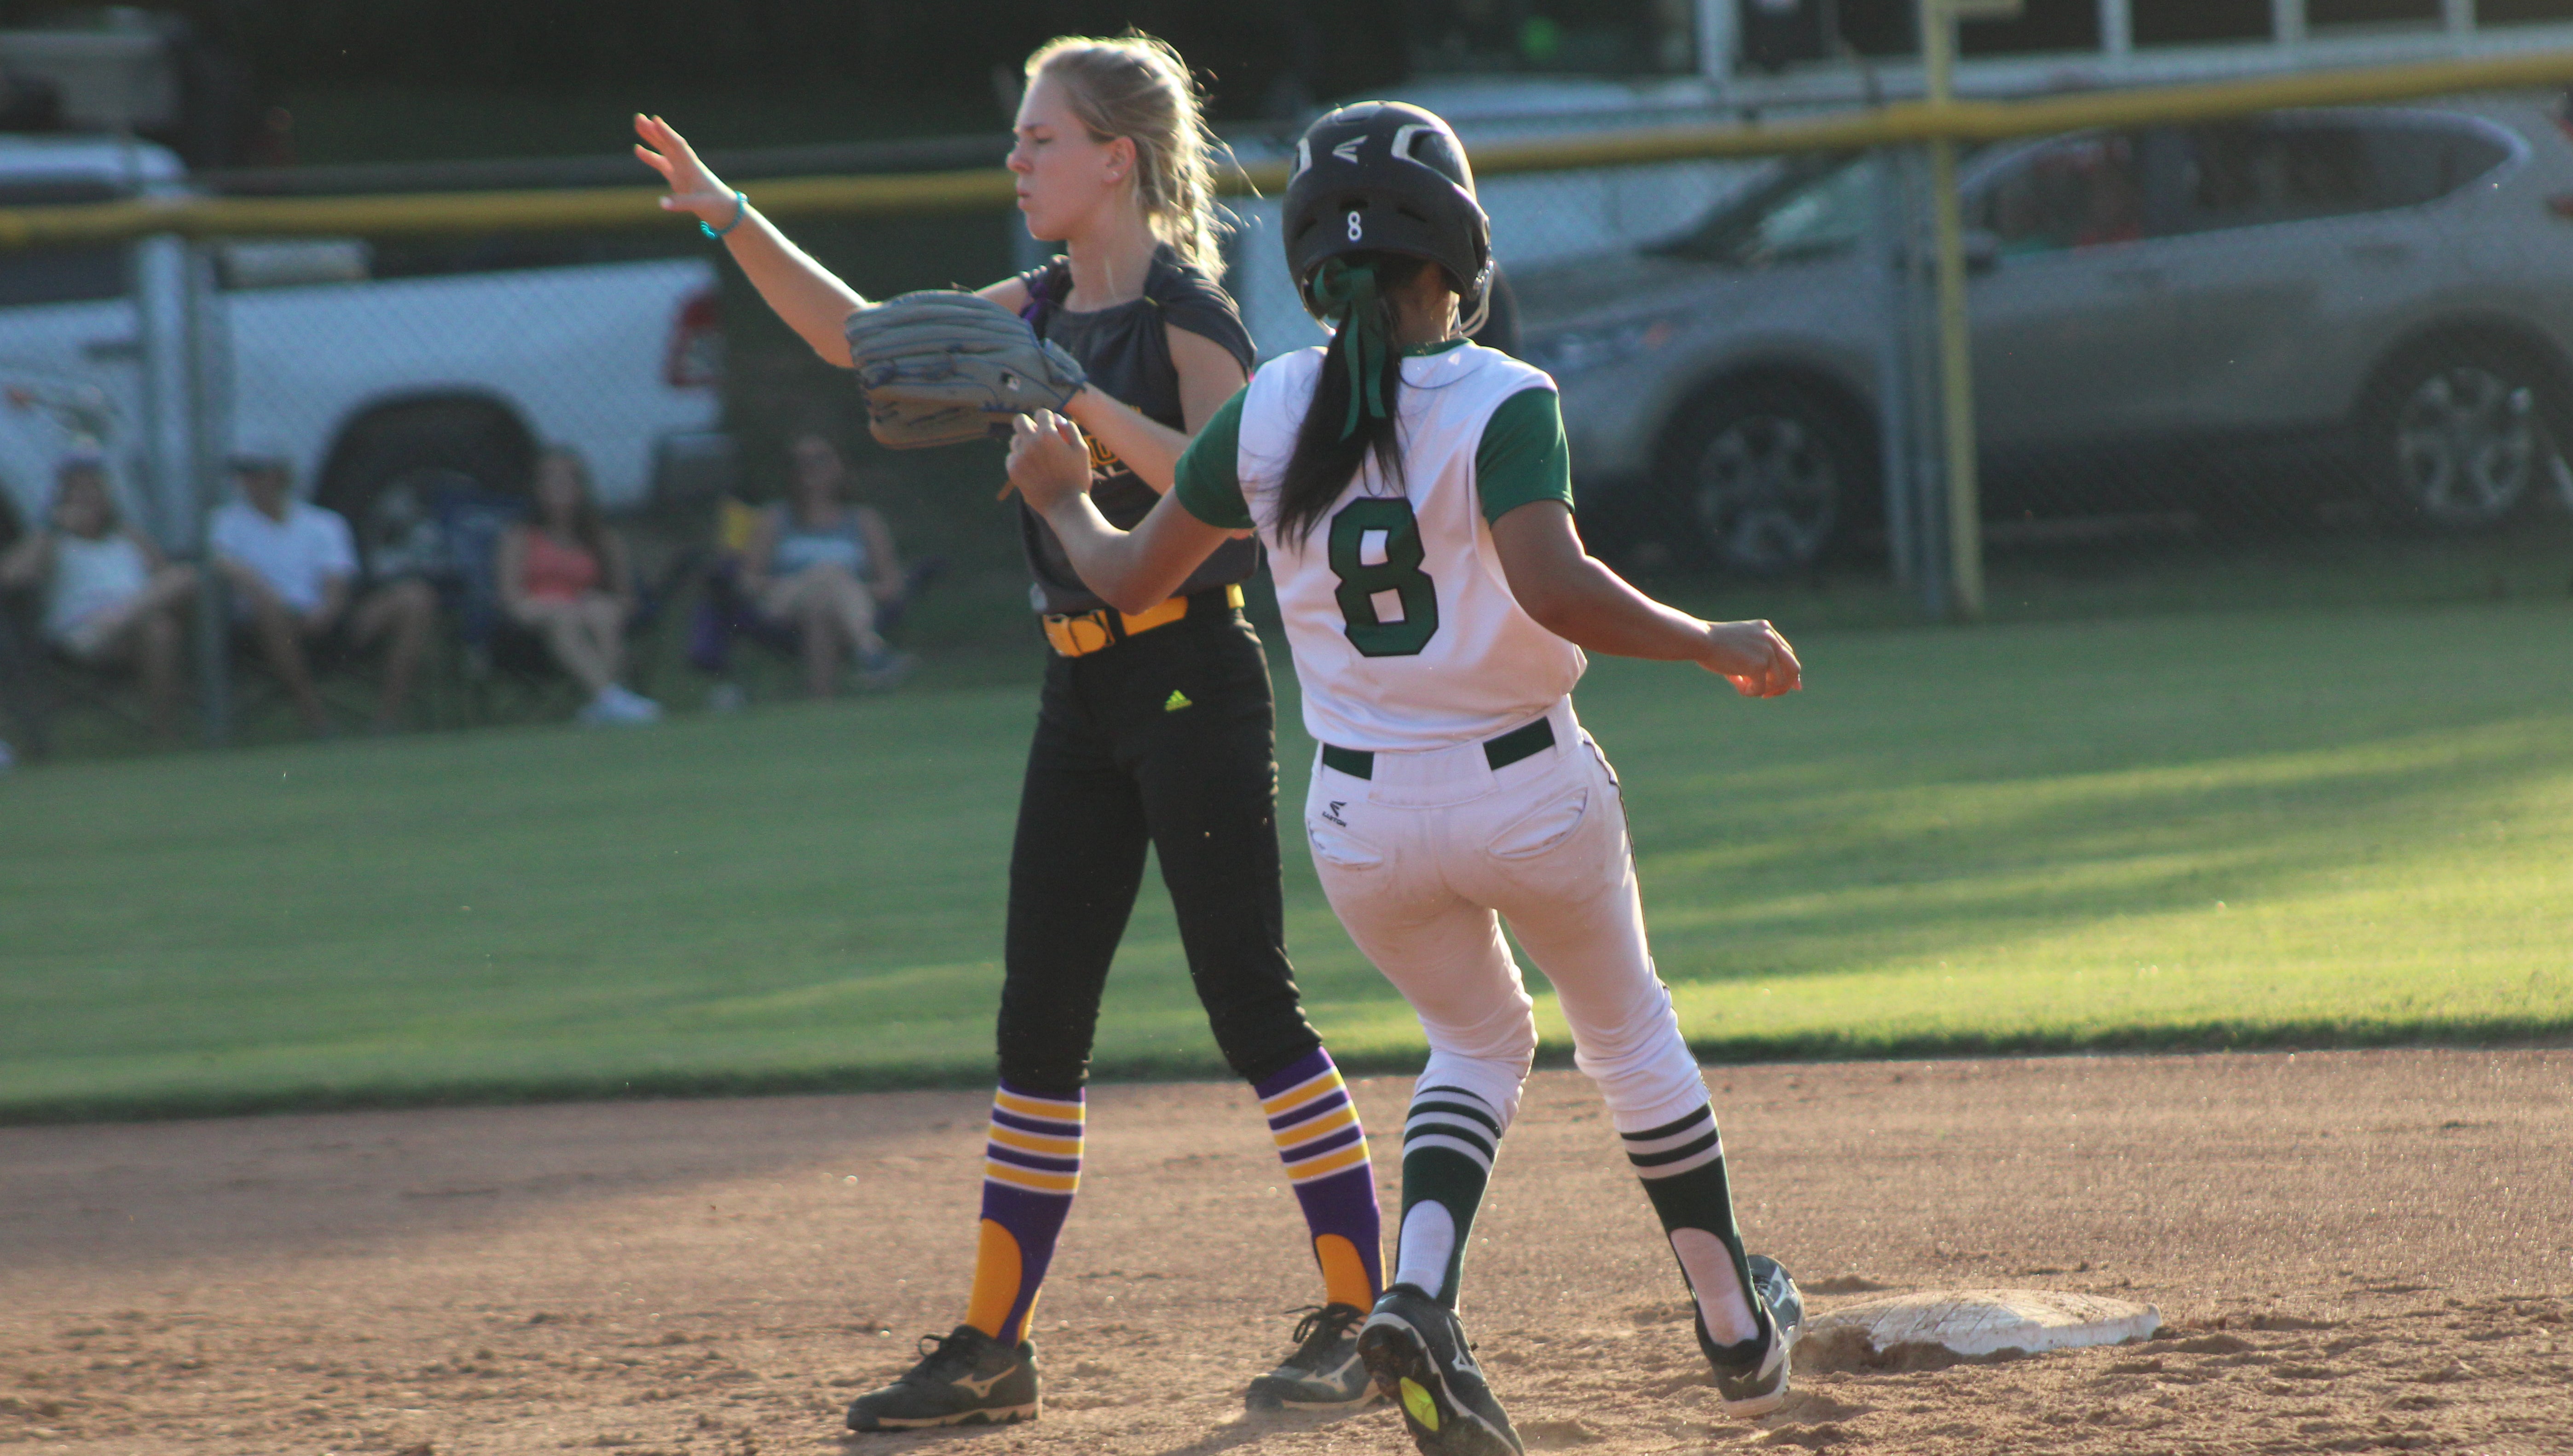 Prep Softball Round Up Centreville Academy Rolls Over Discovery Christian School 13-1 - Mississippis Best Community Newspaper Mississippis Best Community Newspaper